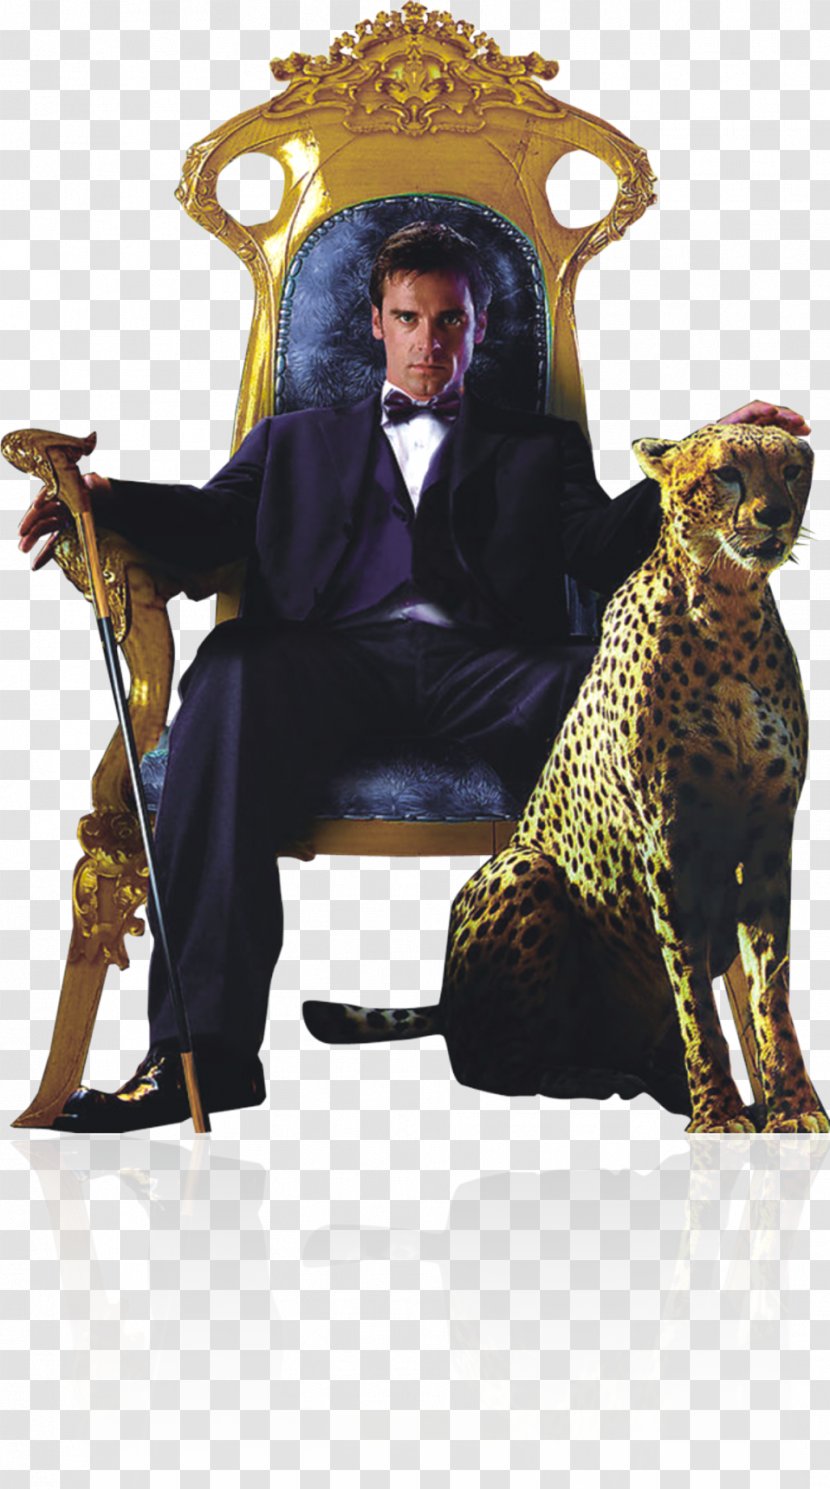 Leopard Poster - Creativity - Honorable Man Transparent PNG